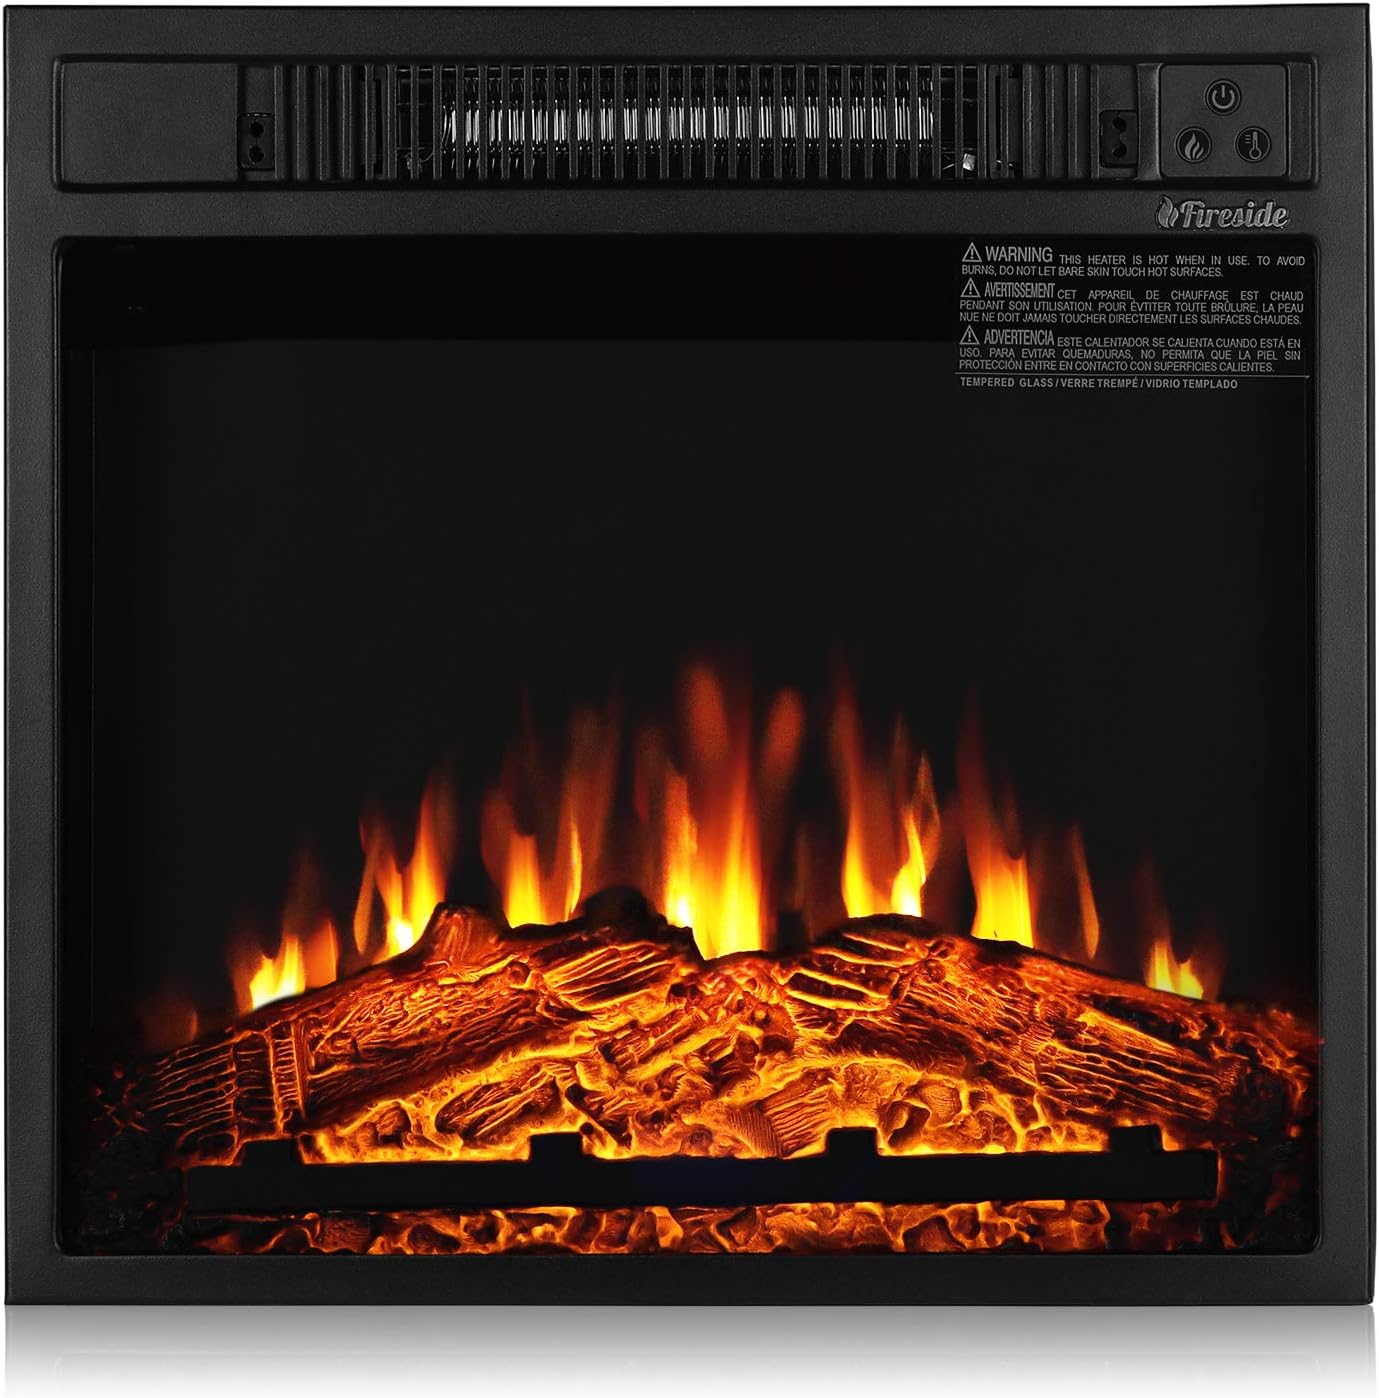 TURBRO Fireside FS18 Realistic Flames Electric Fireplace, Remote Control, 3 Adjustable Brightness Flames